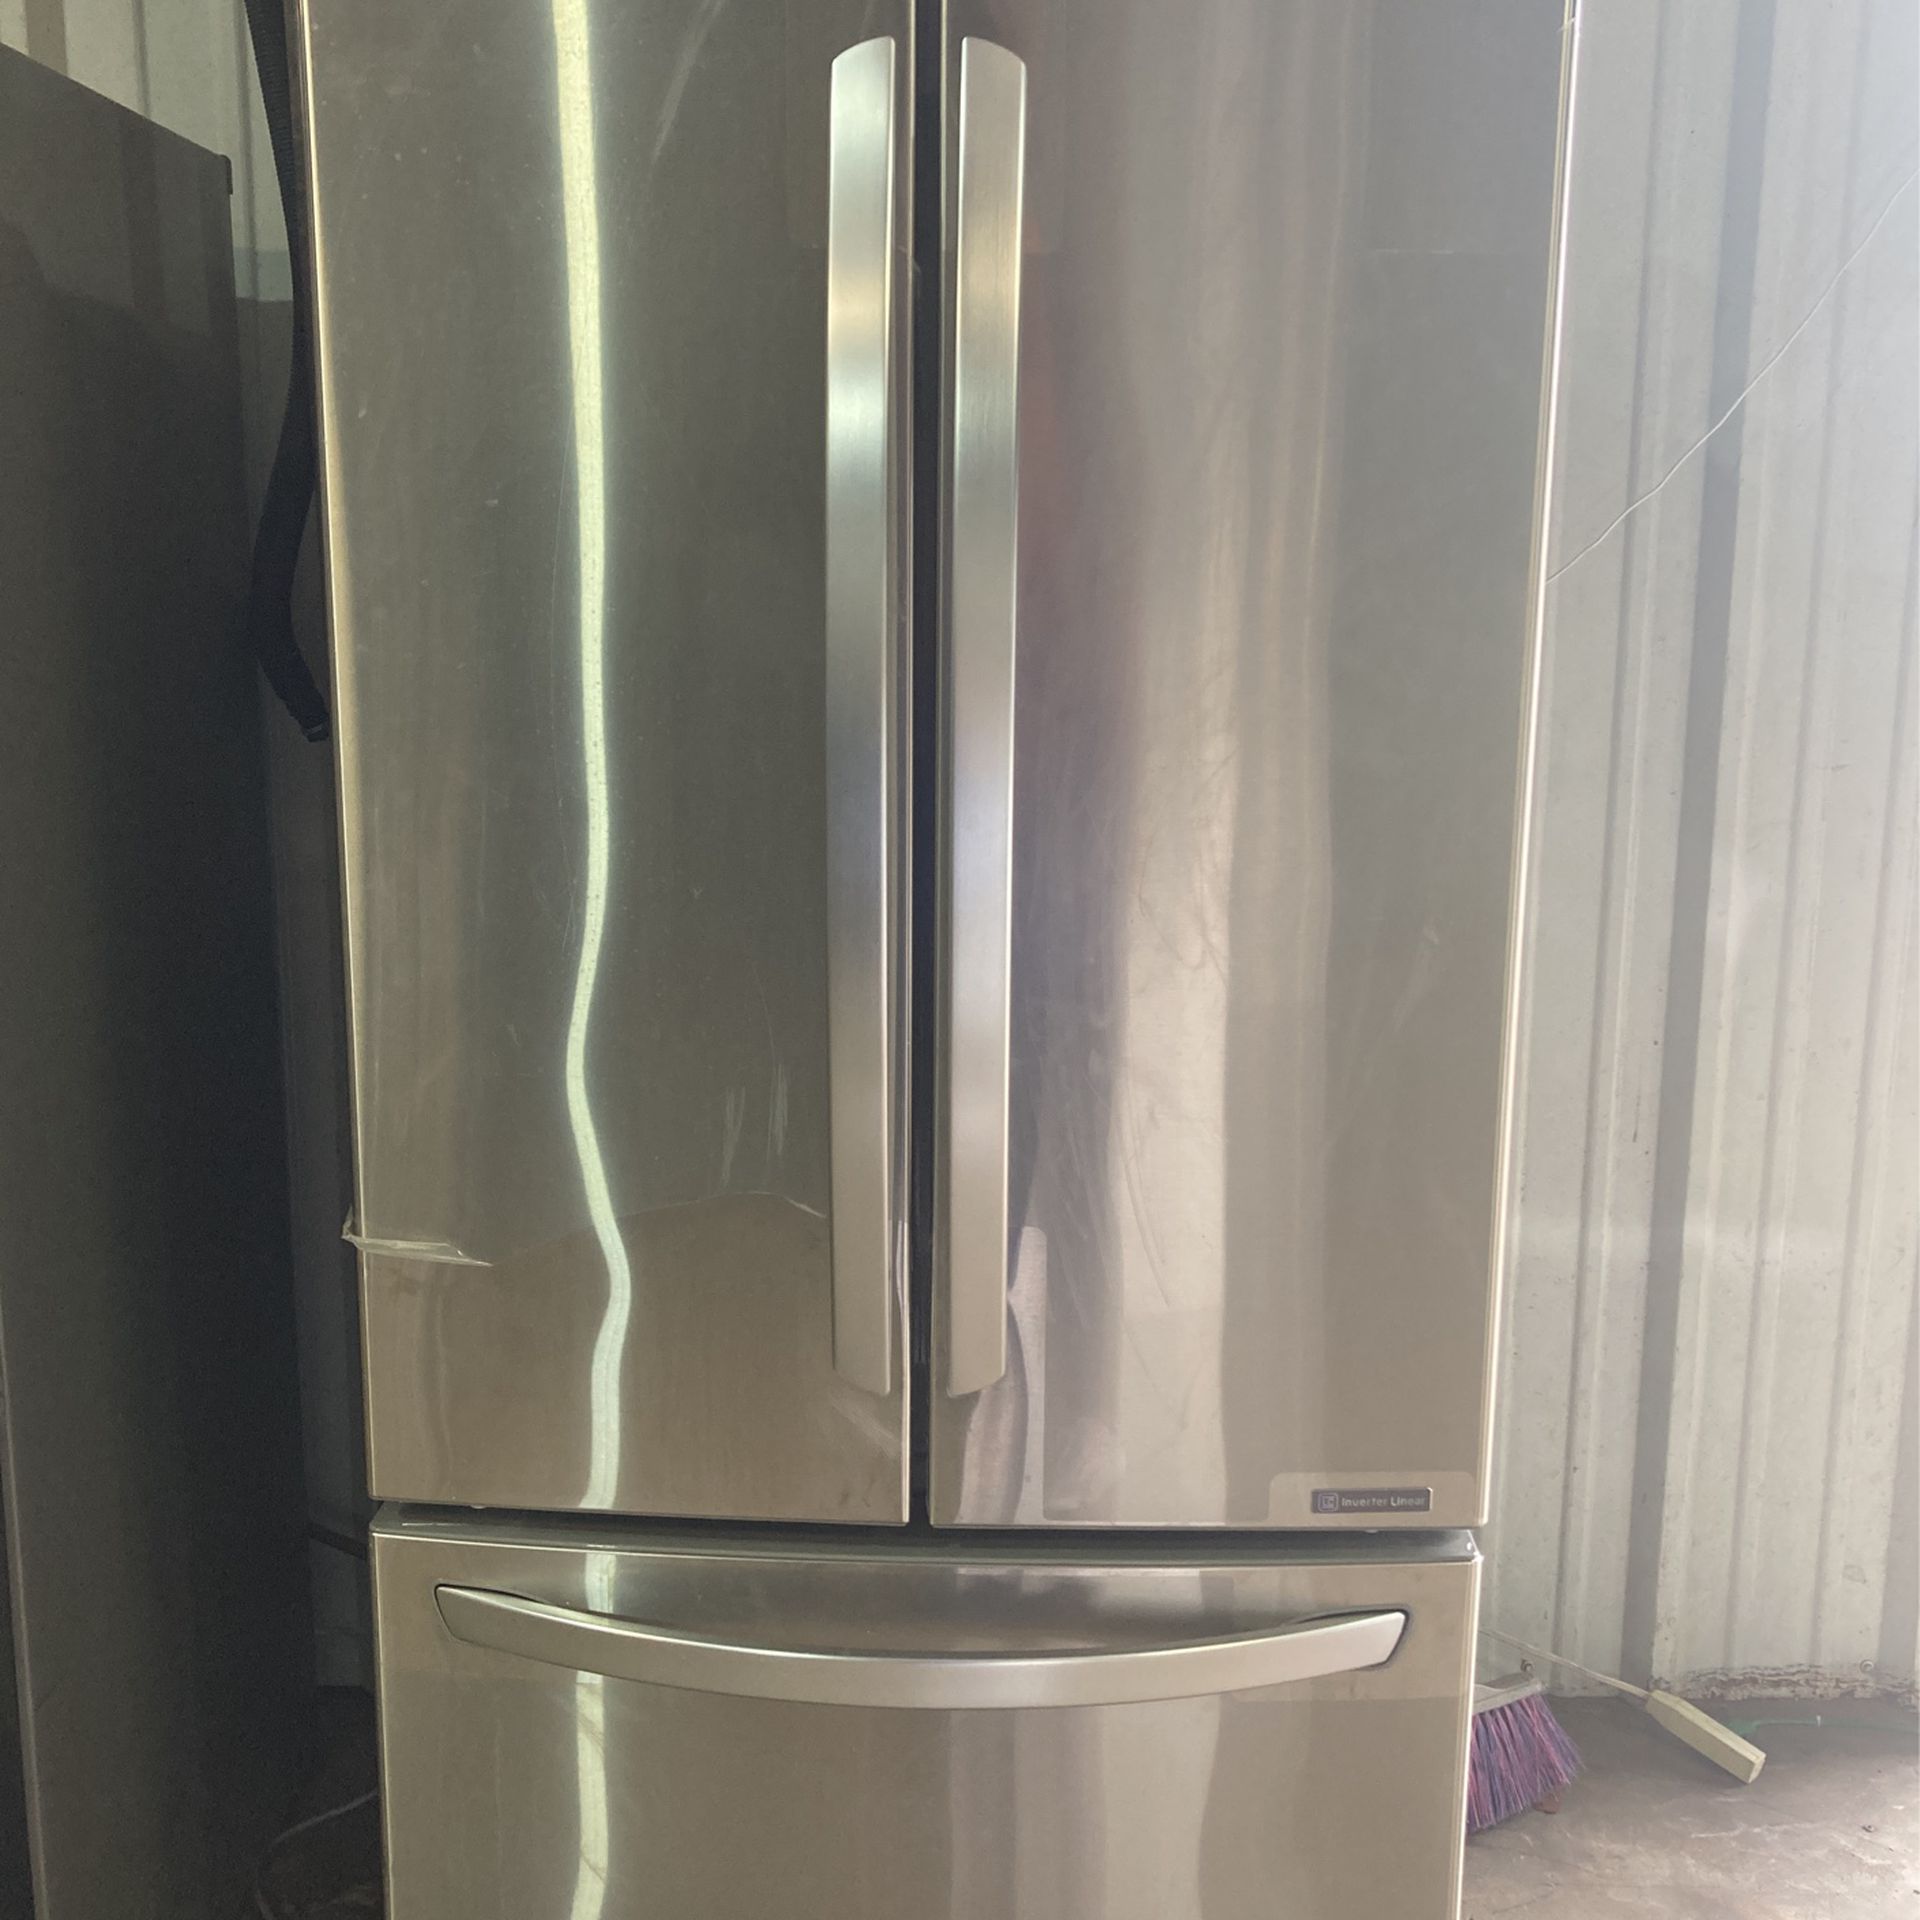 LG refrigerator French door stainless